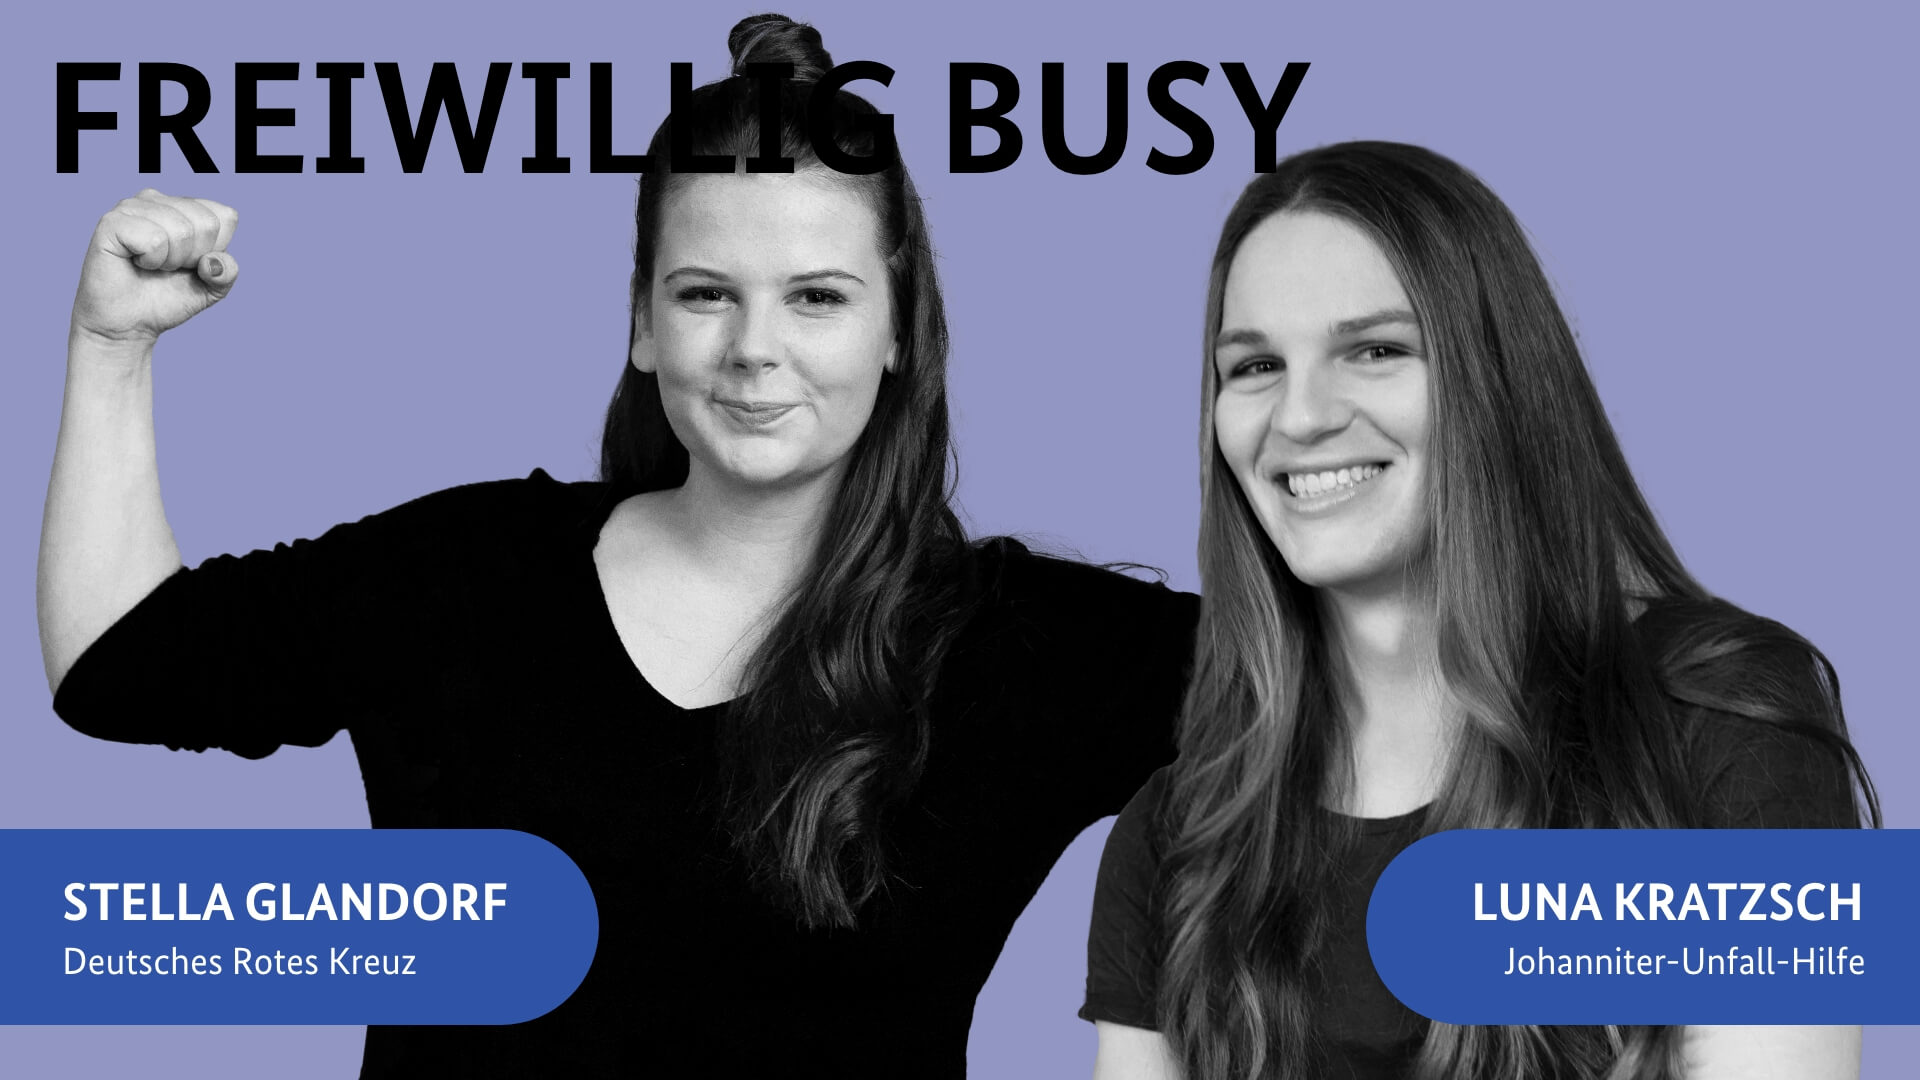 Voluntarily Busy – The Video Podcast about Volunteering with Portrais of Stella Glandorf and Luna Kratzsch